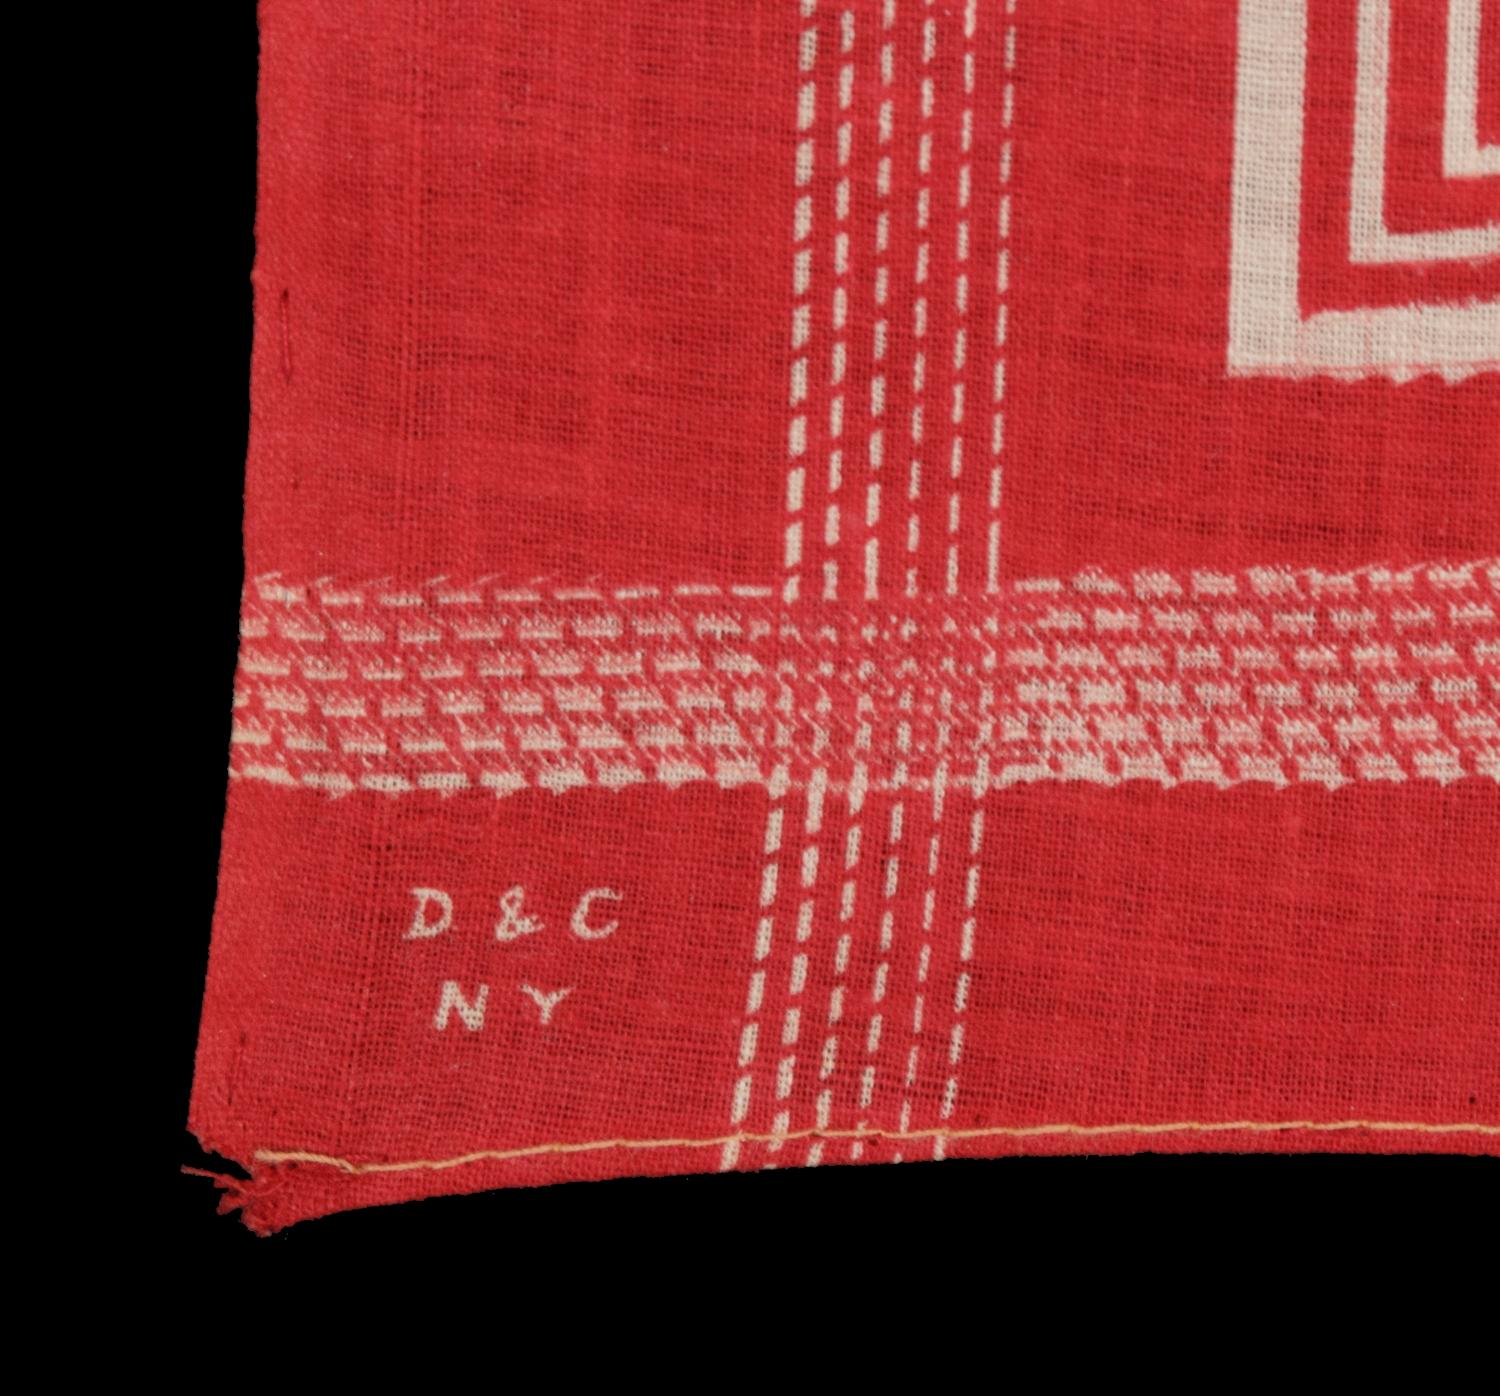 Early 20th Century Roosevelt Battle Flag Kerchief, Made for the 1912 Presidential Campaign